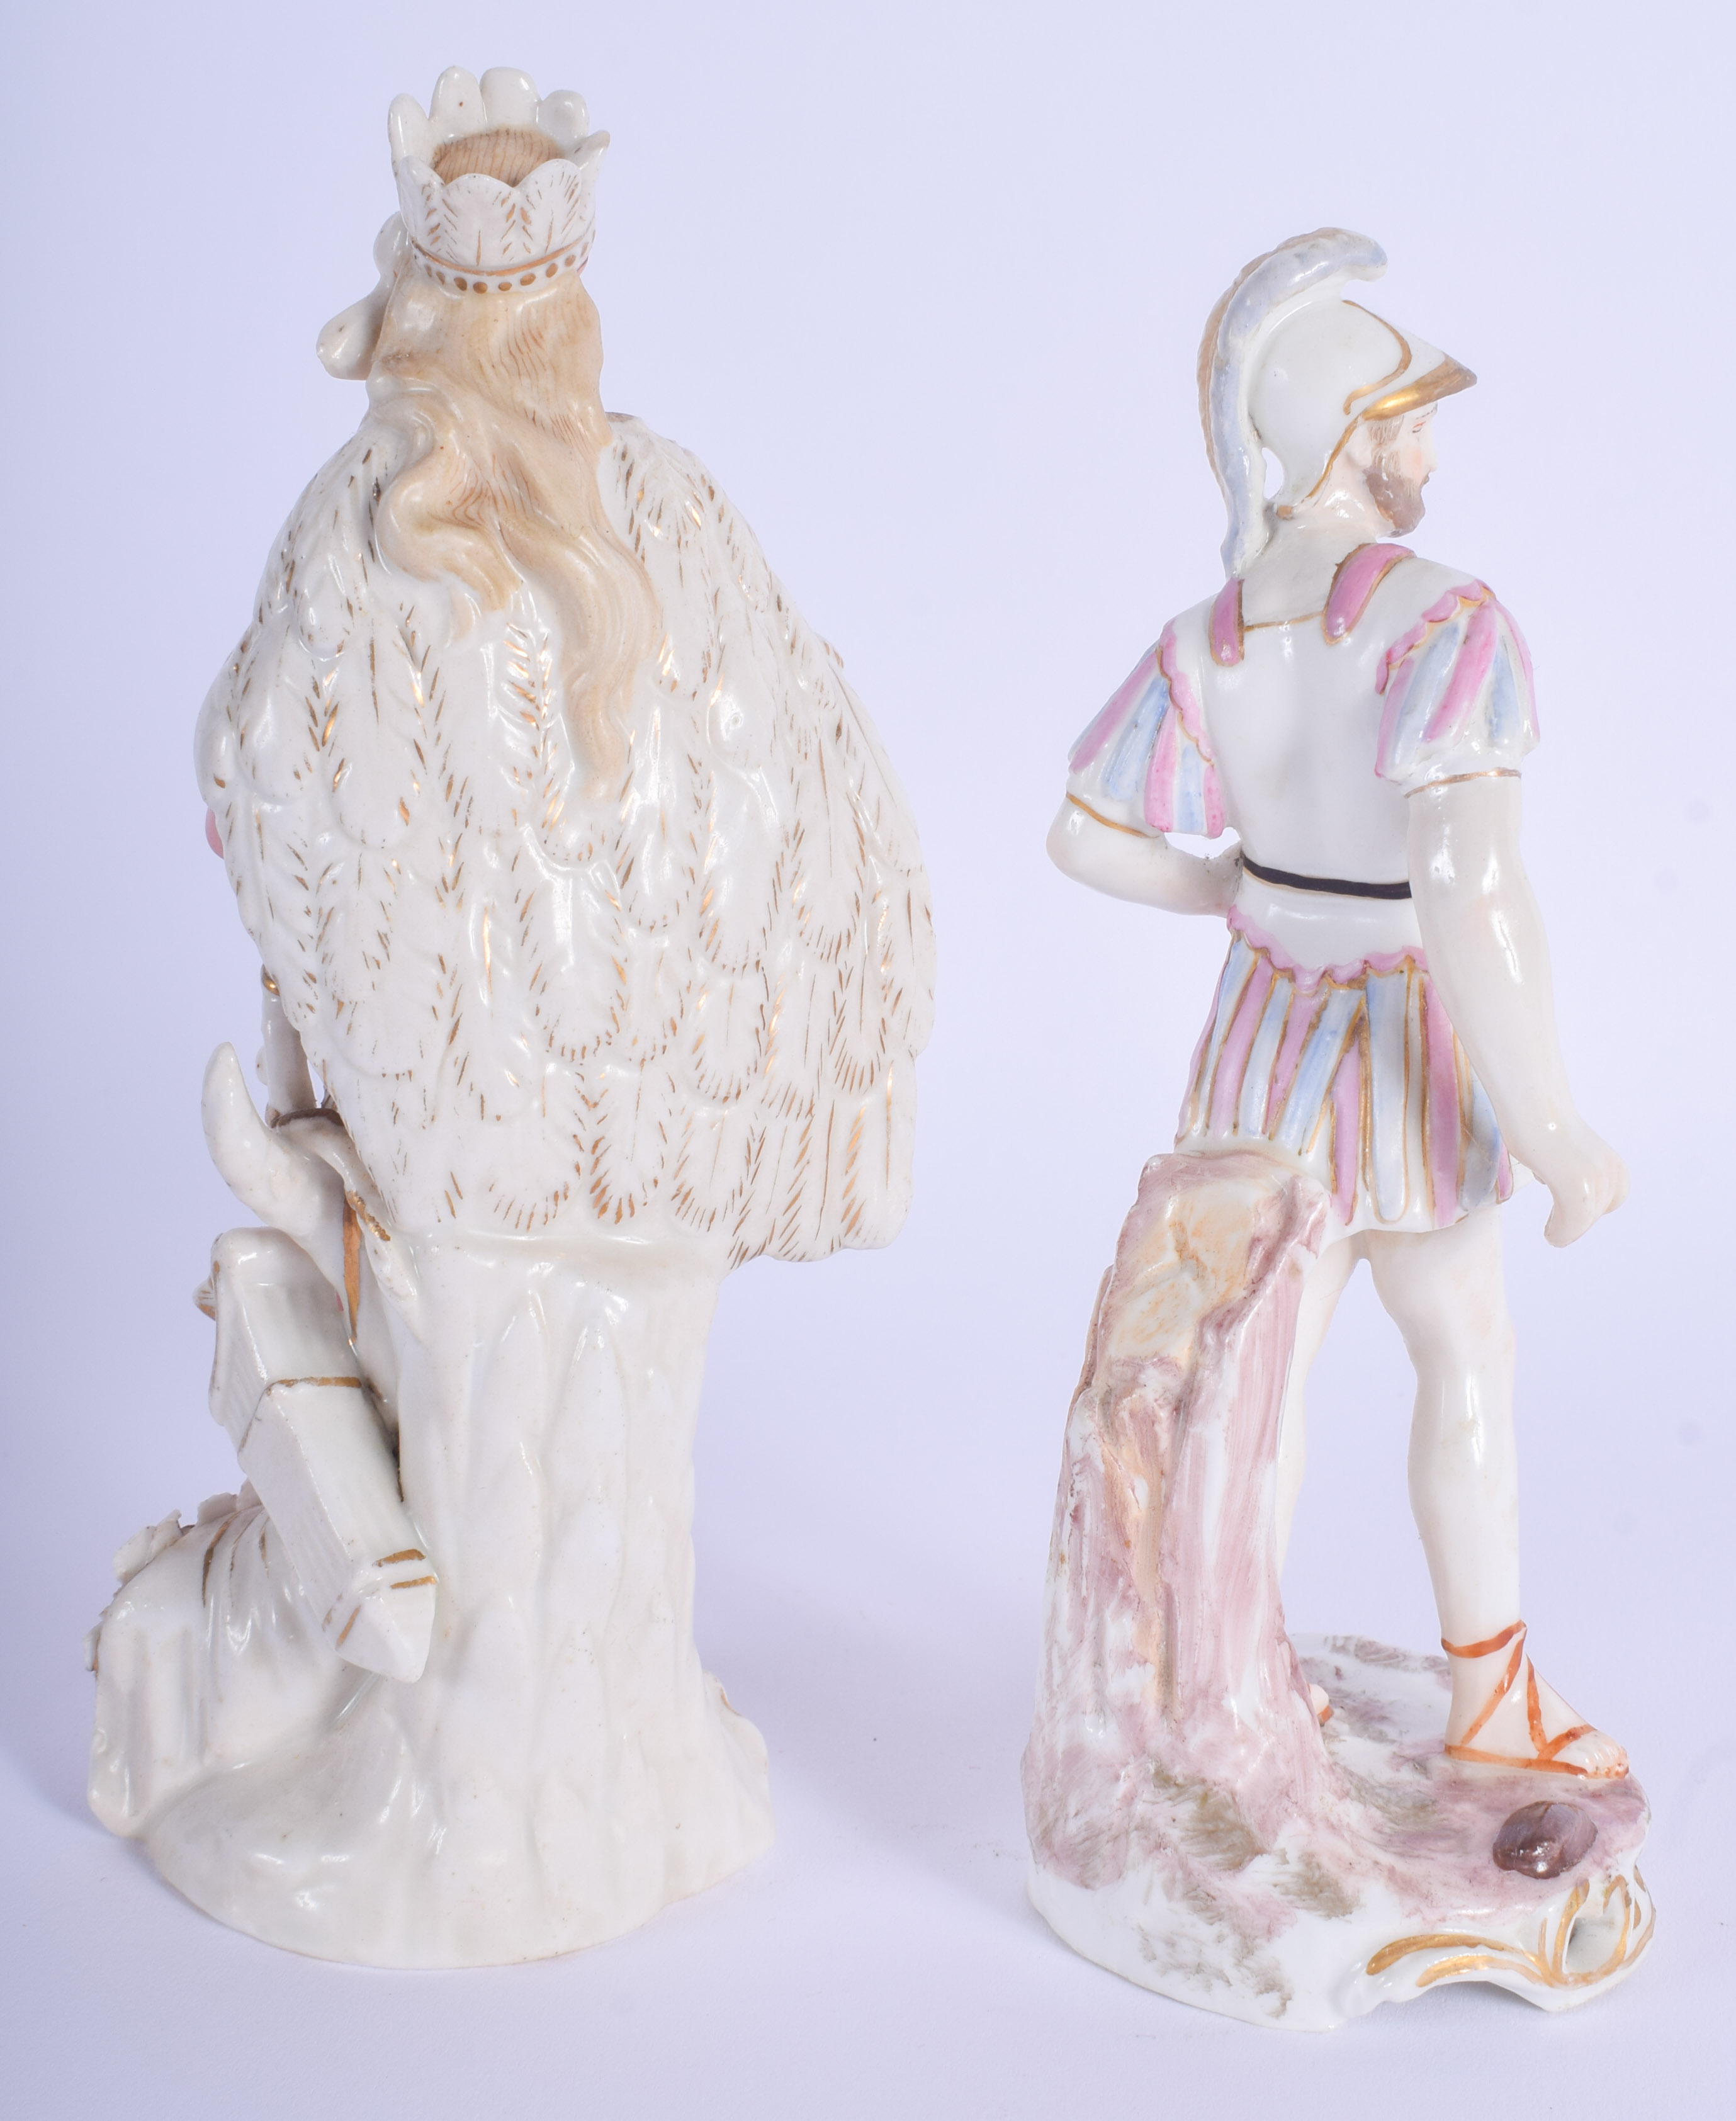 A PAIR OF 19TH CENTURY CONTINENTAL PORCELAIN FIGURES after 18th century originals. 16.5 cm high. - Image 2 of 3